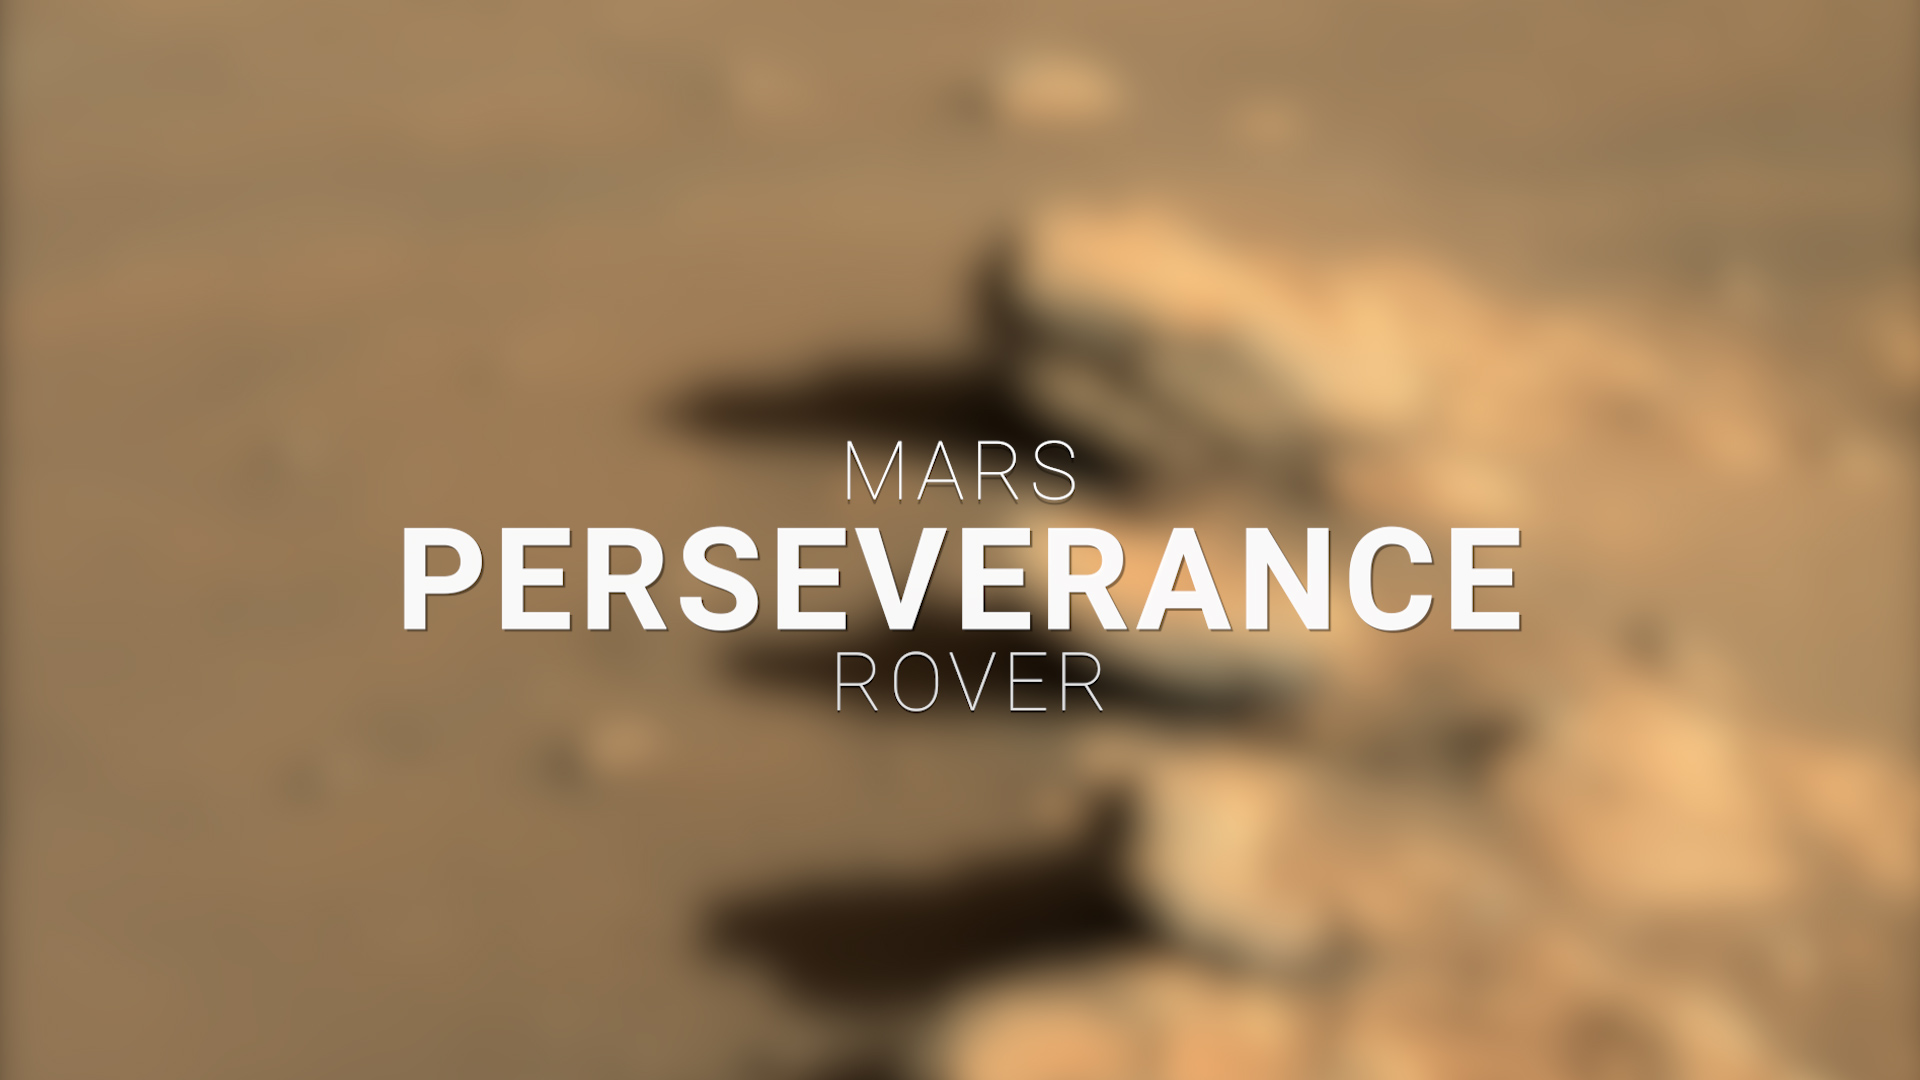 Watch video for Mars Perseverance Rover: Your Most 'Liked' Images 2022